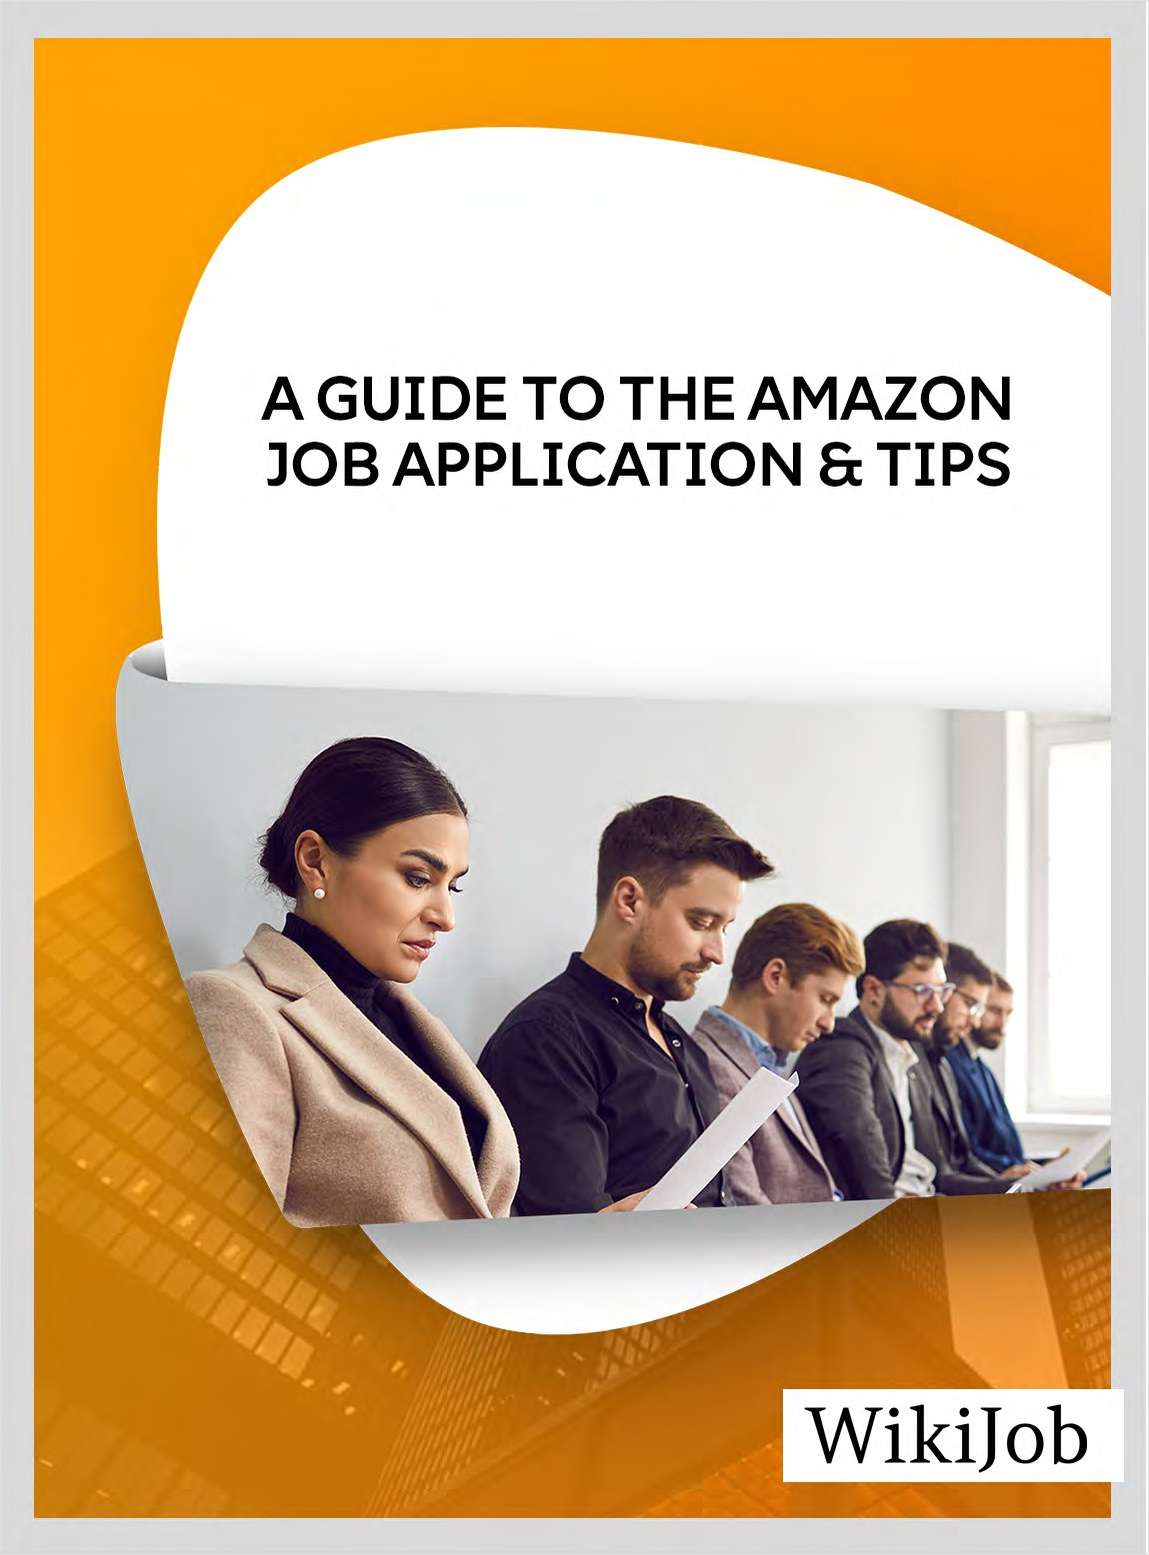 A Guide to the Amazon Job Application & Tips